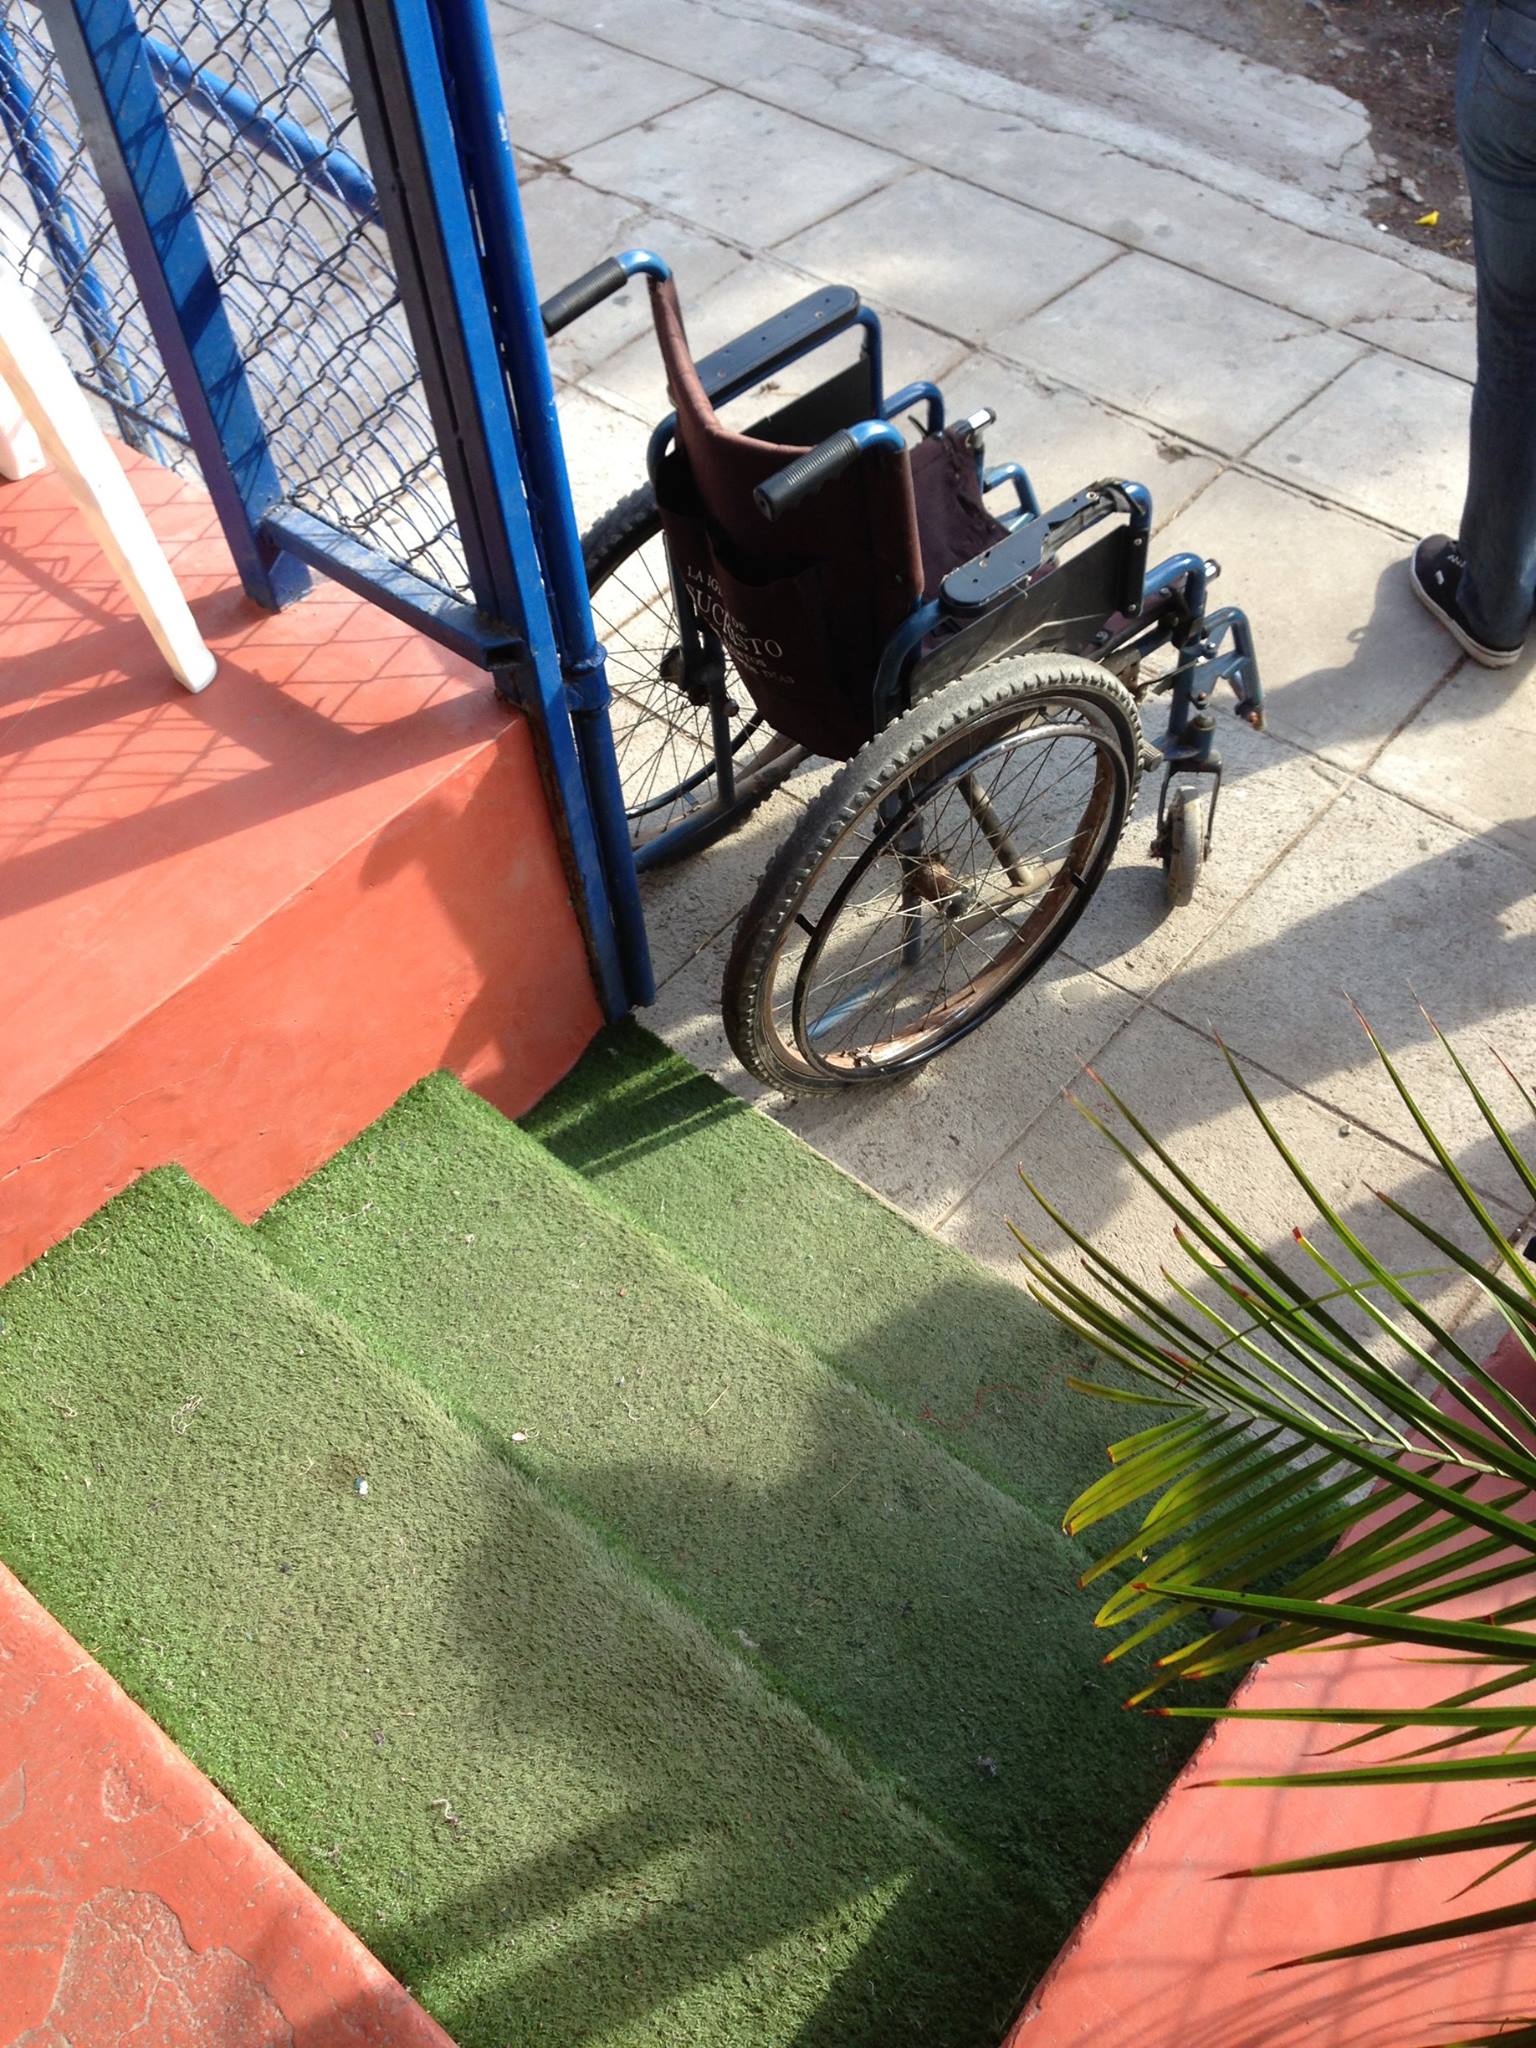 Luis' lonely wheelchair.